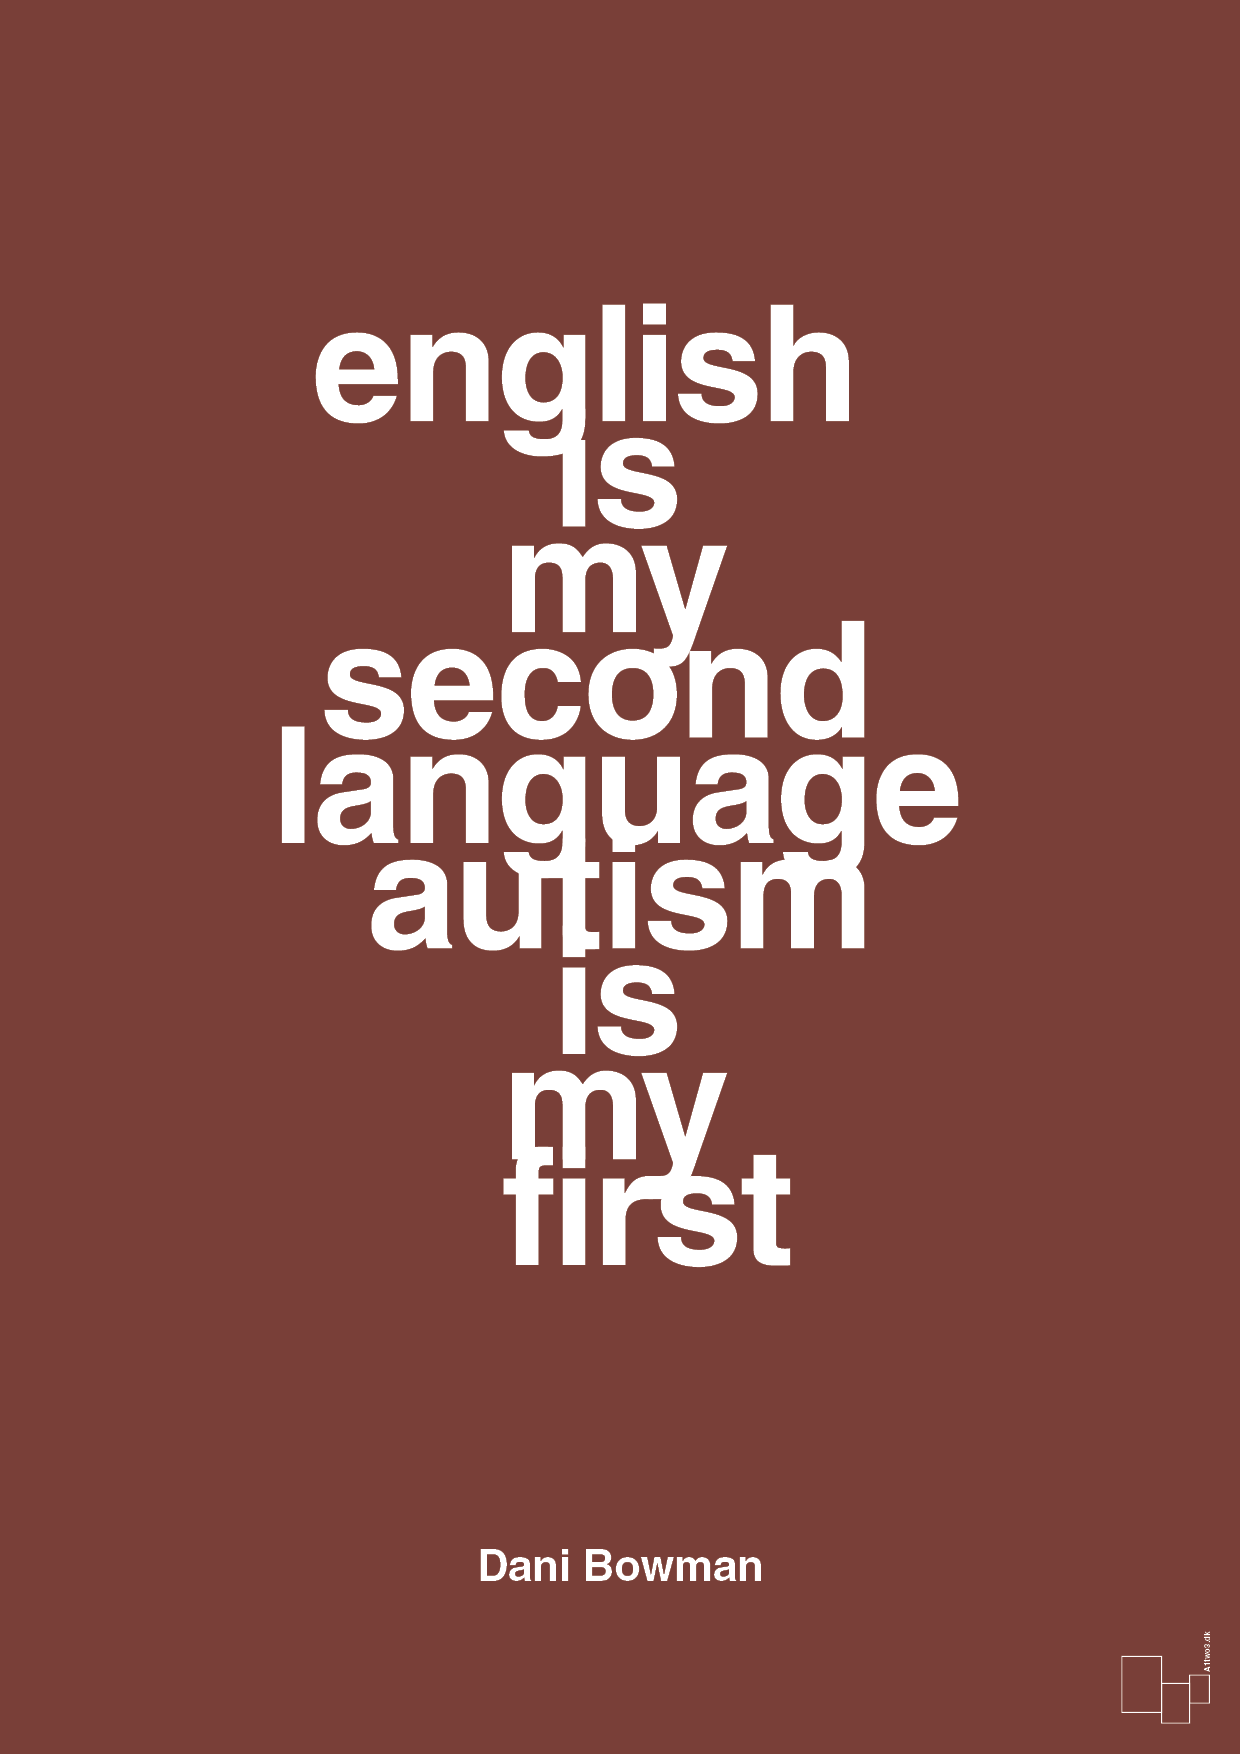 english is my second language autism is my first - Plakat med Samfund i Red Pepper